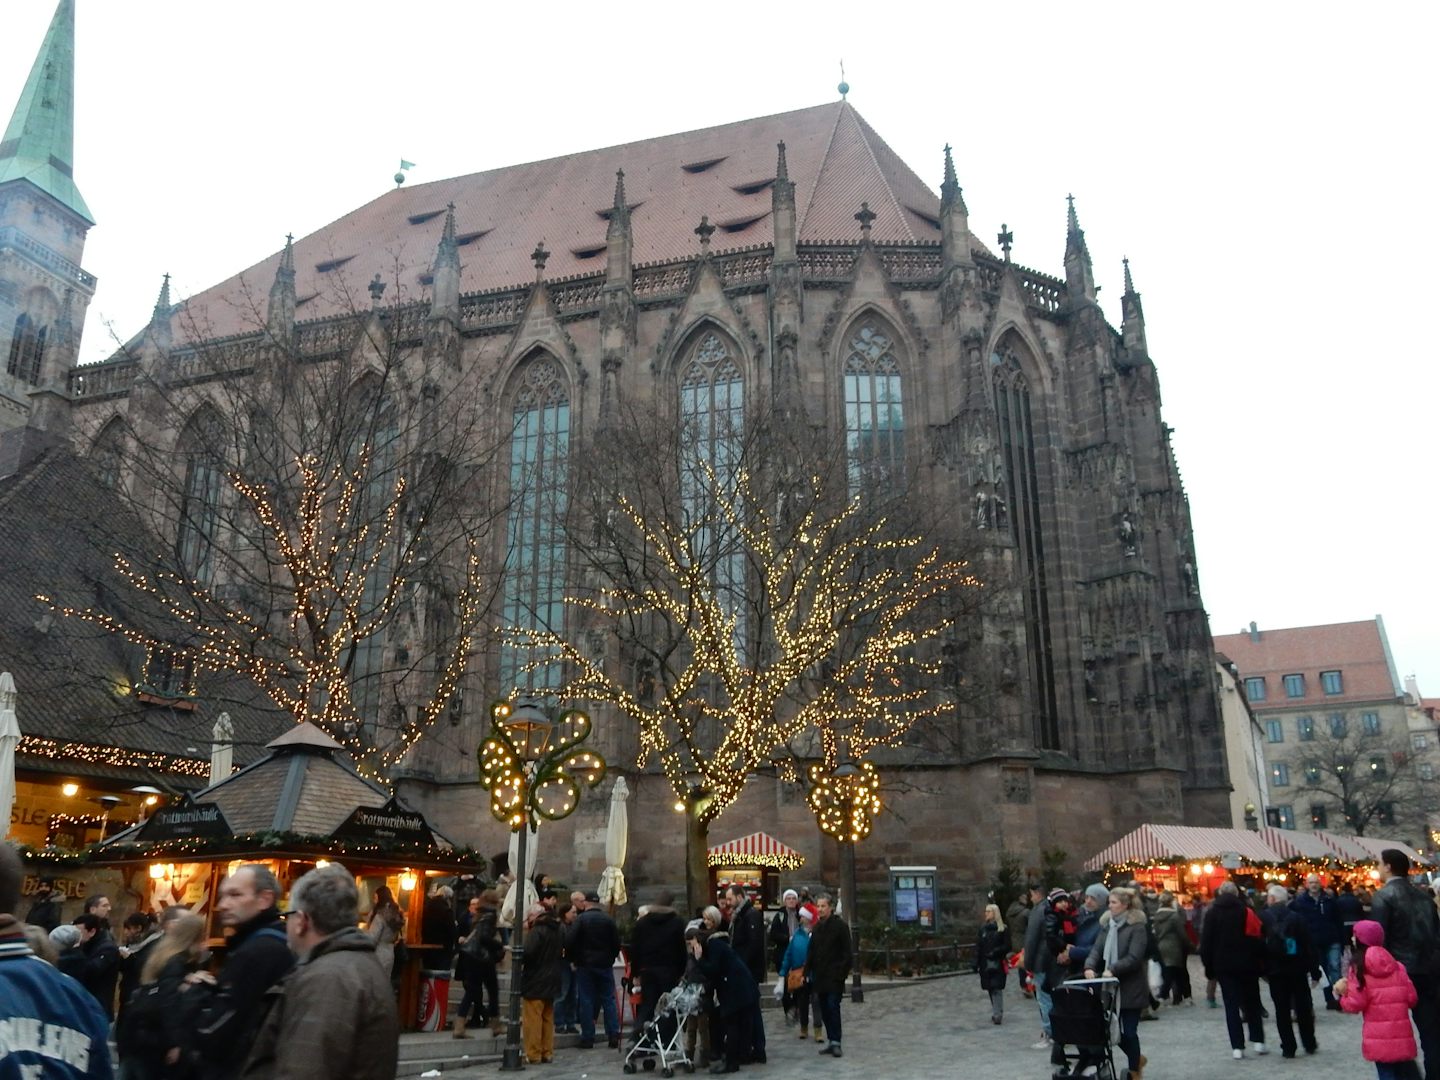 The Christmas Market at the Church Square